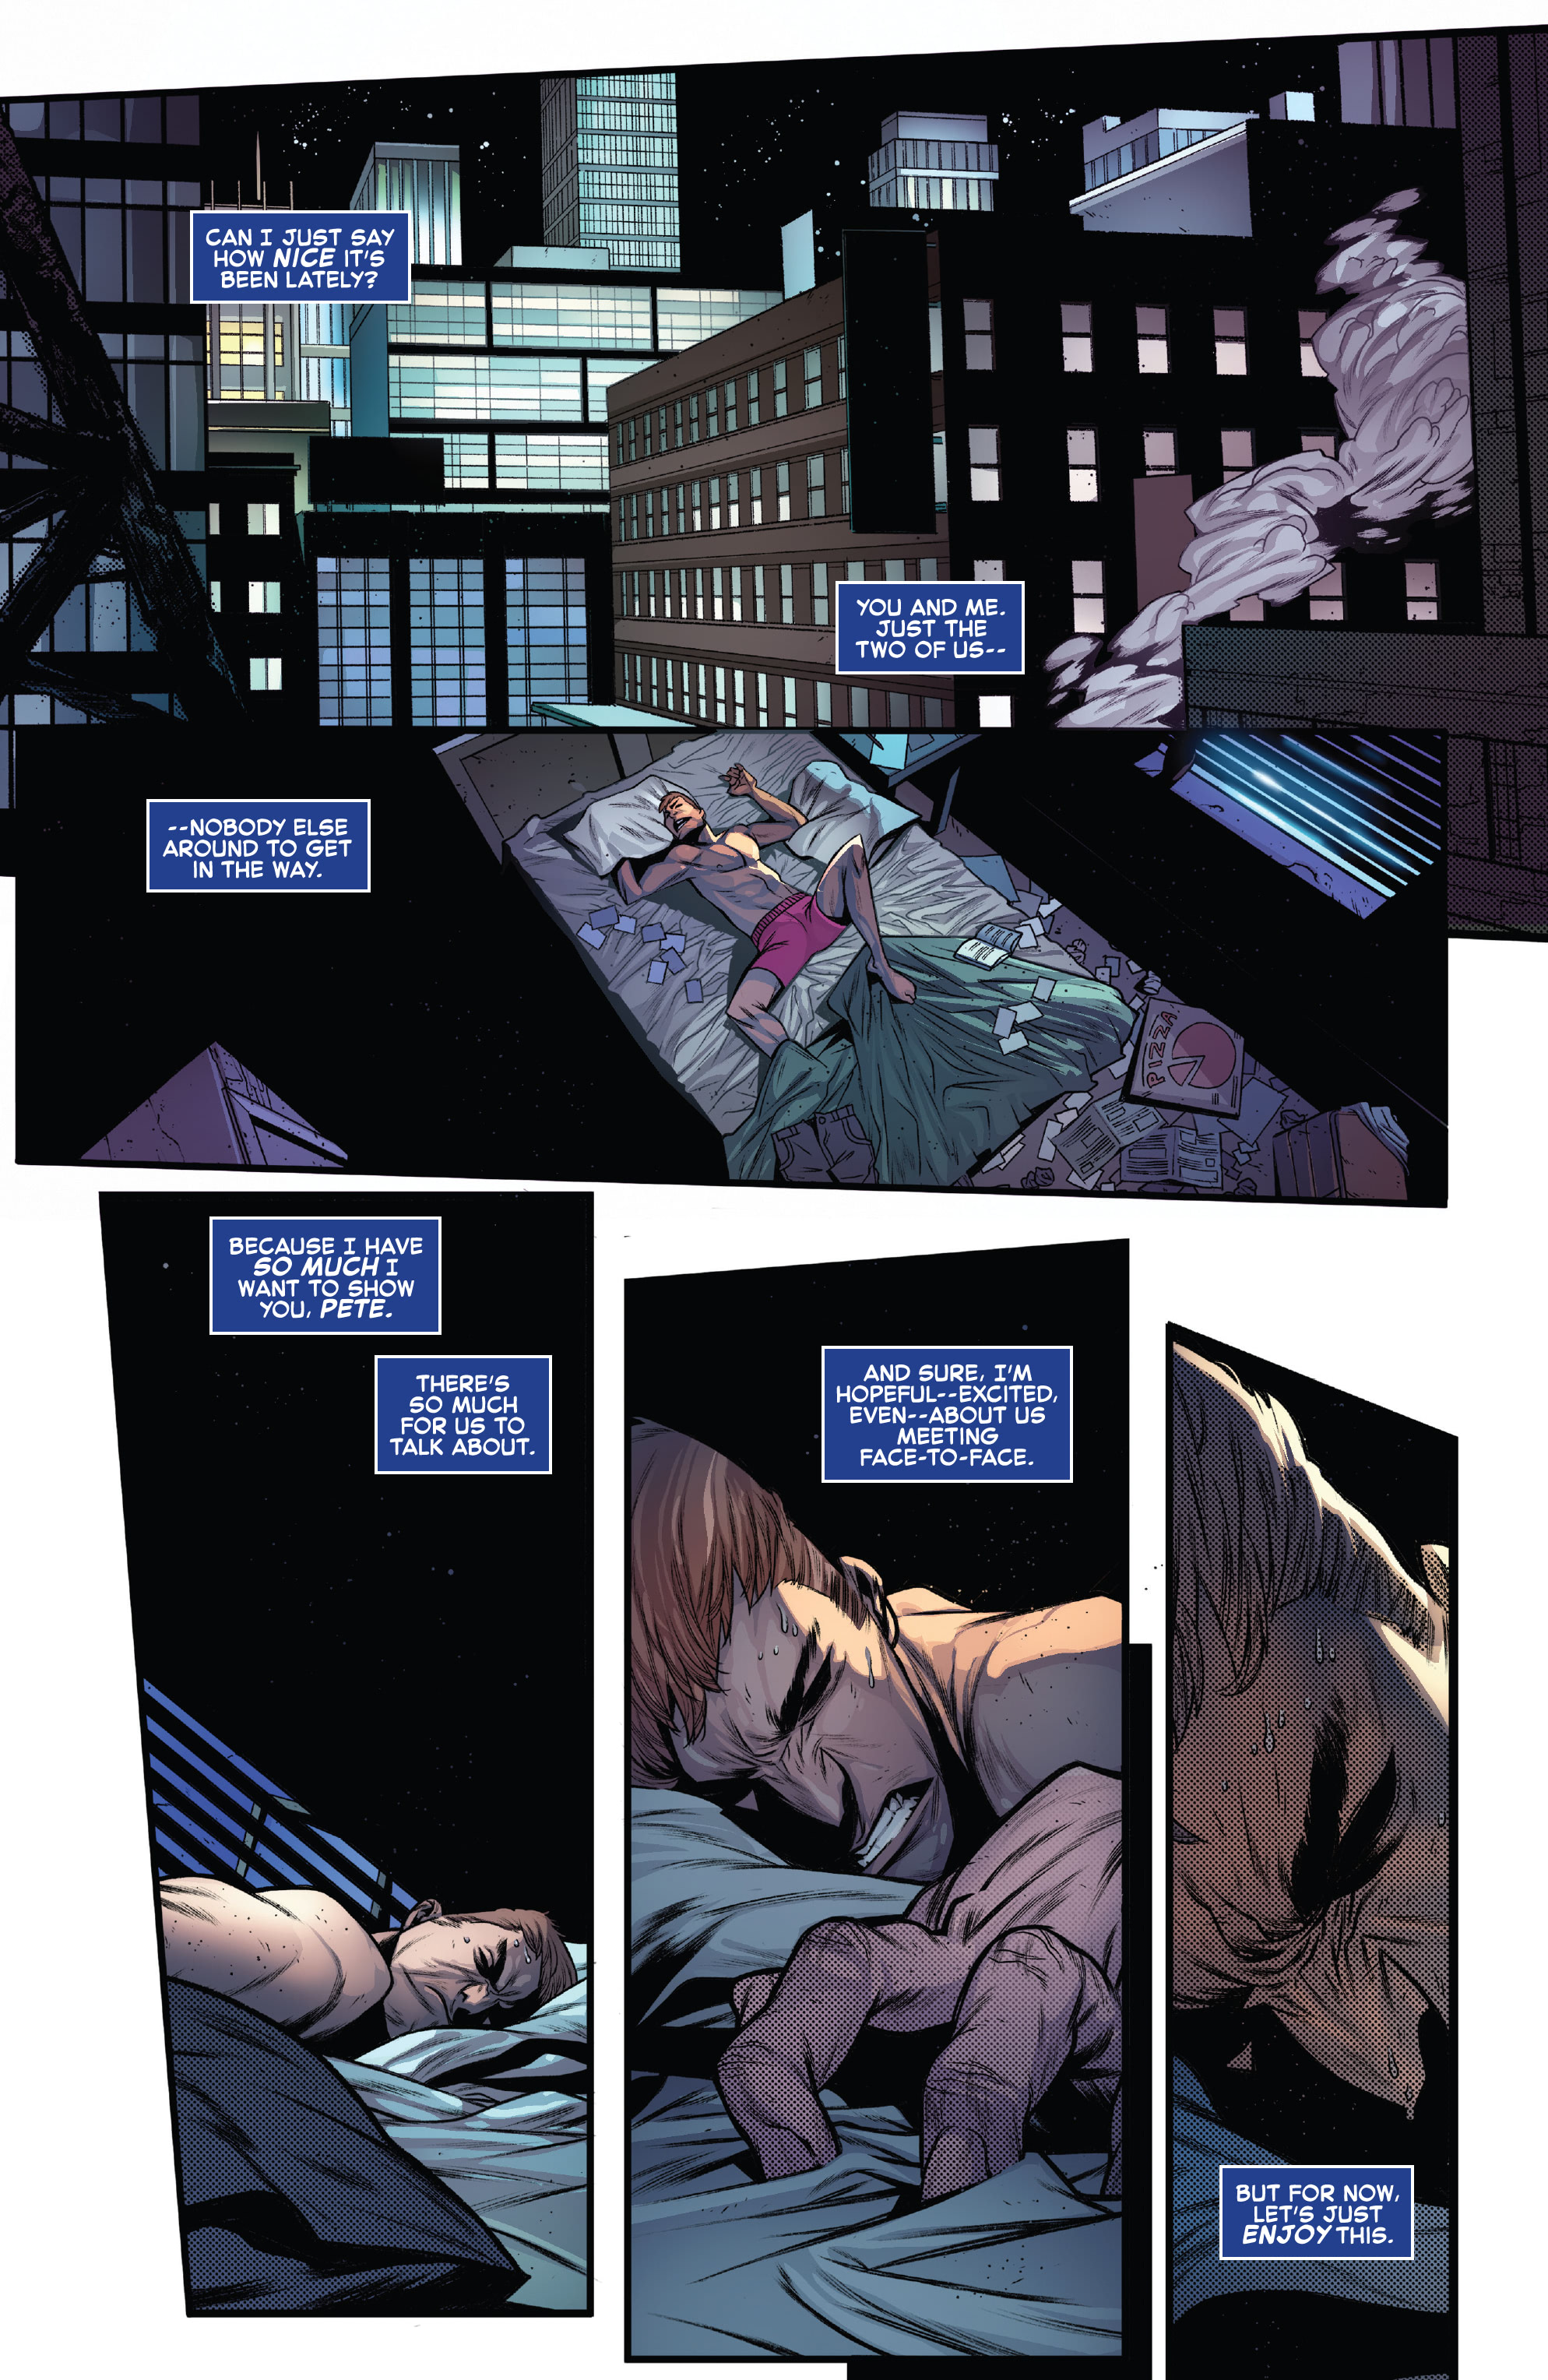 Amazing Spider-Man (2018-): Chapter 44 - Page 3